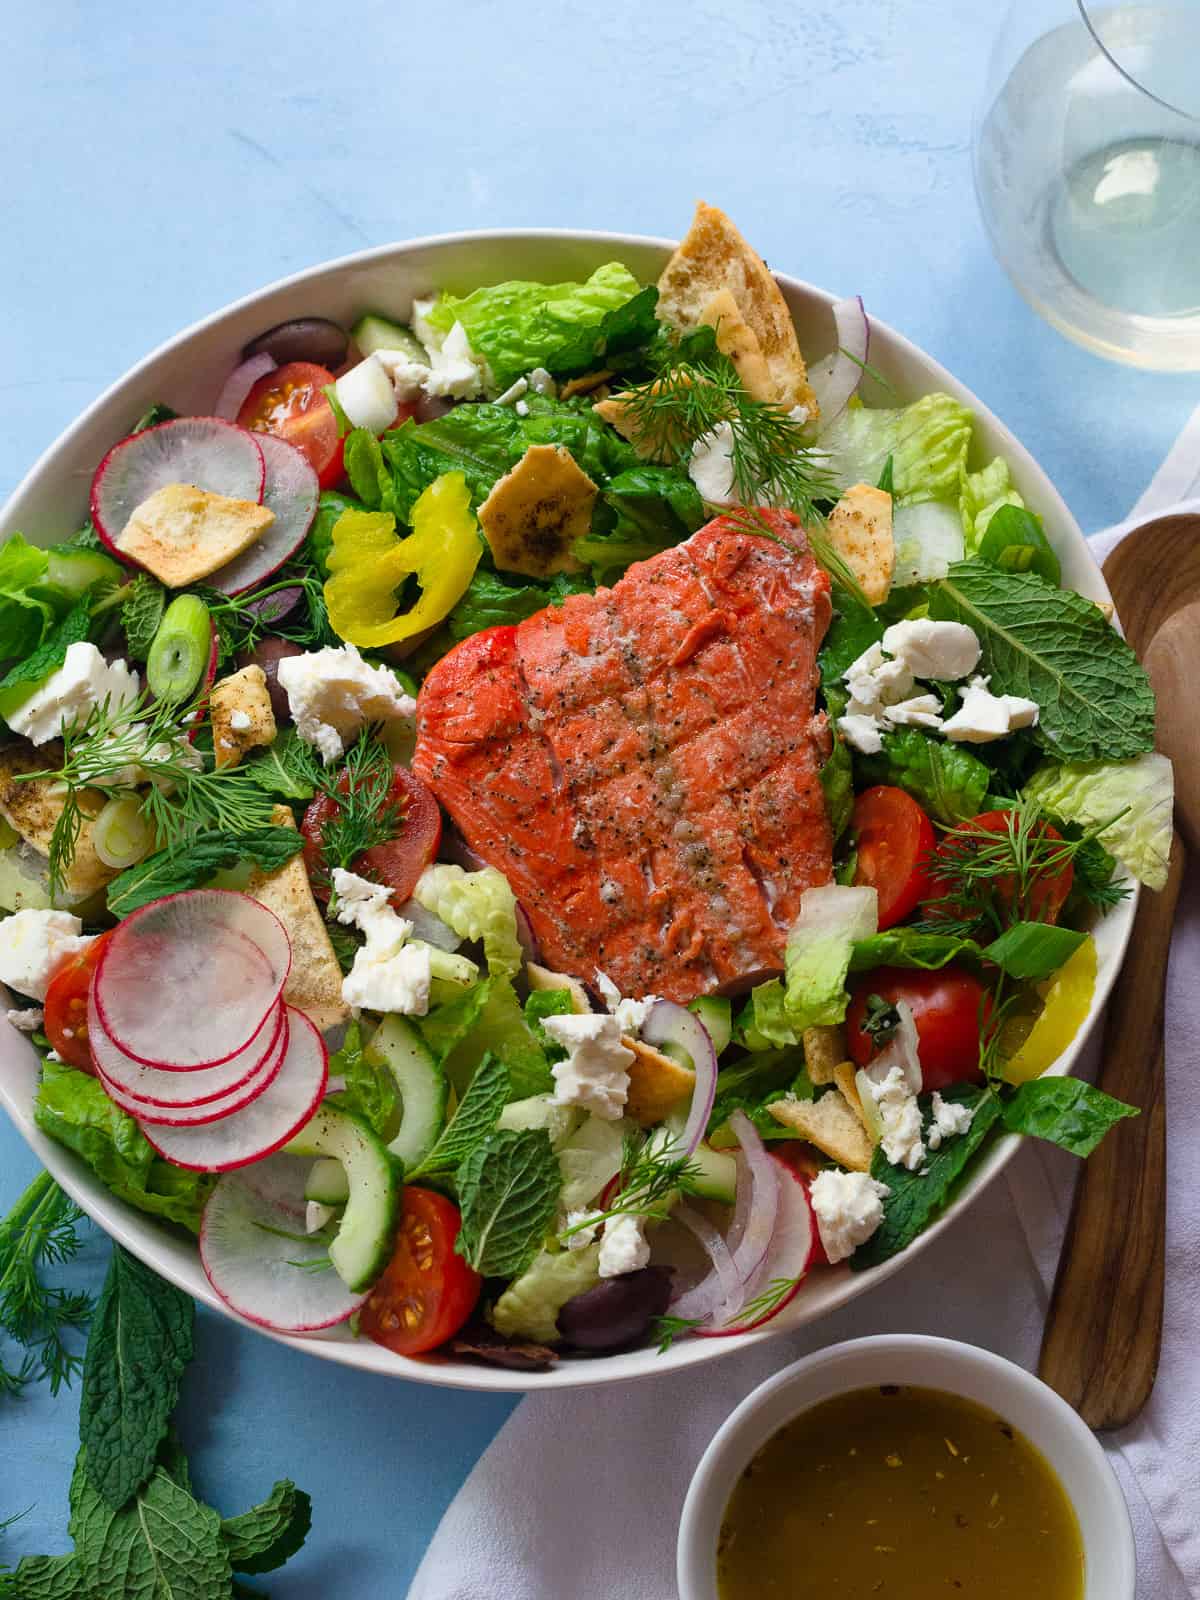 Greek fattoush salad with grilled salmon